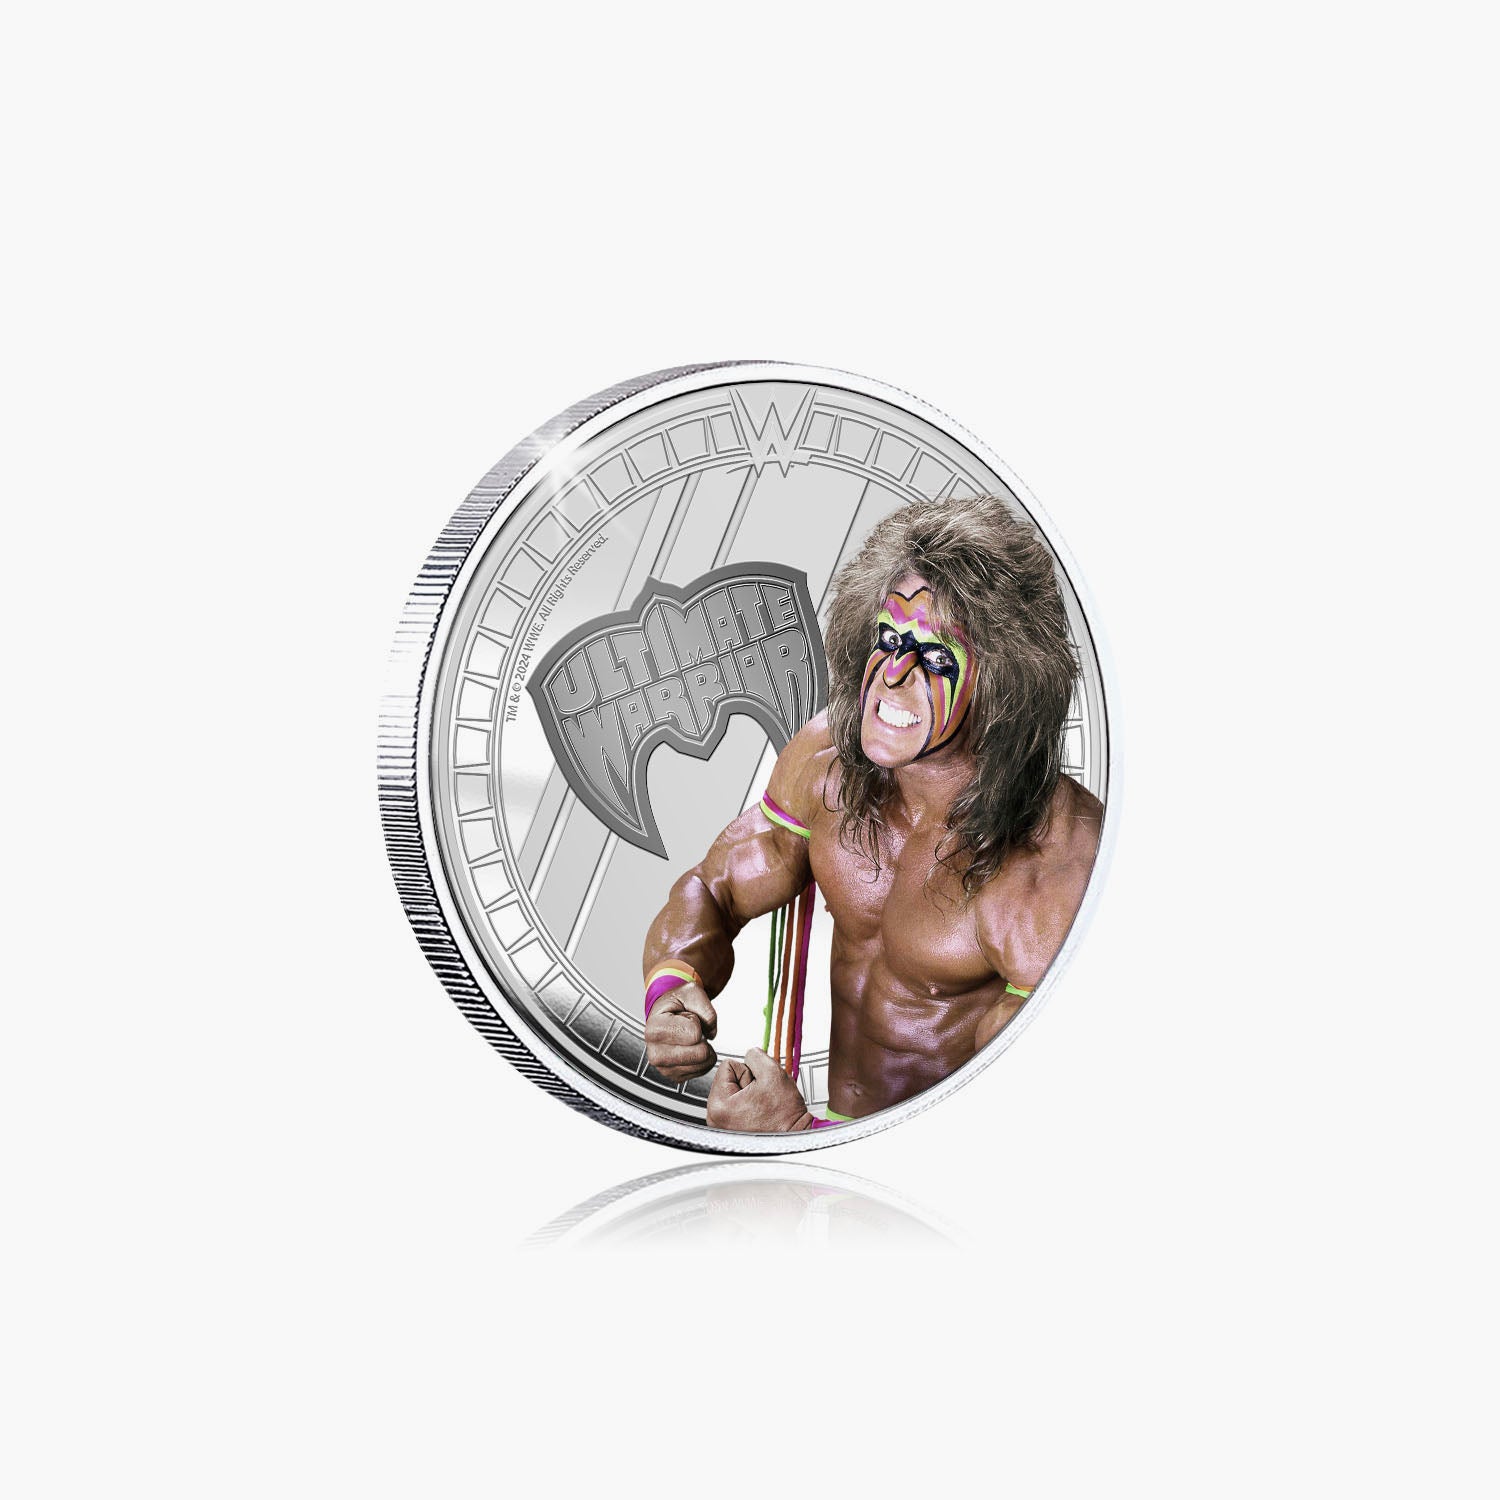 WWE Commemorative Collection - Ultimate Warrior - 32mm Silver Plated Commemorative